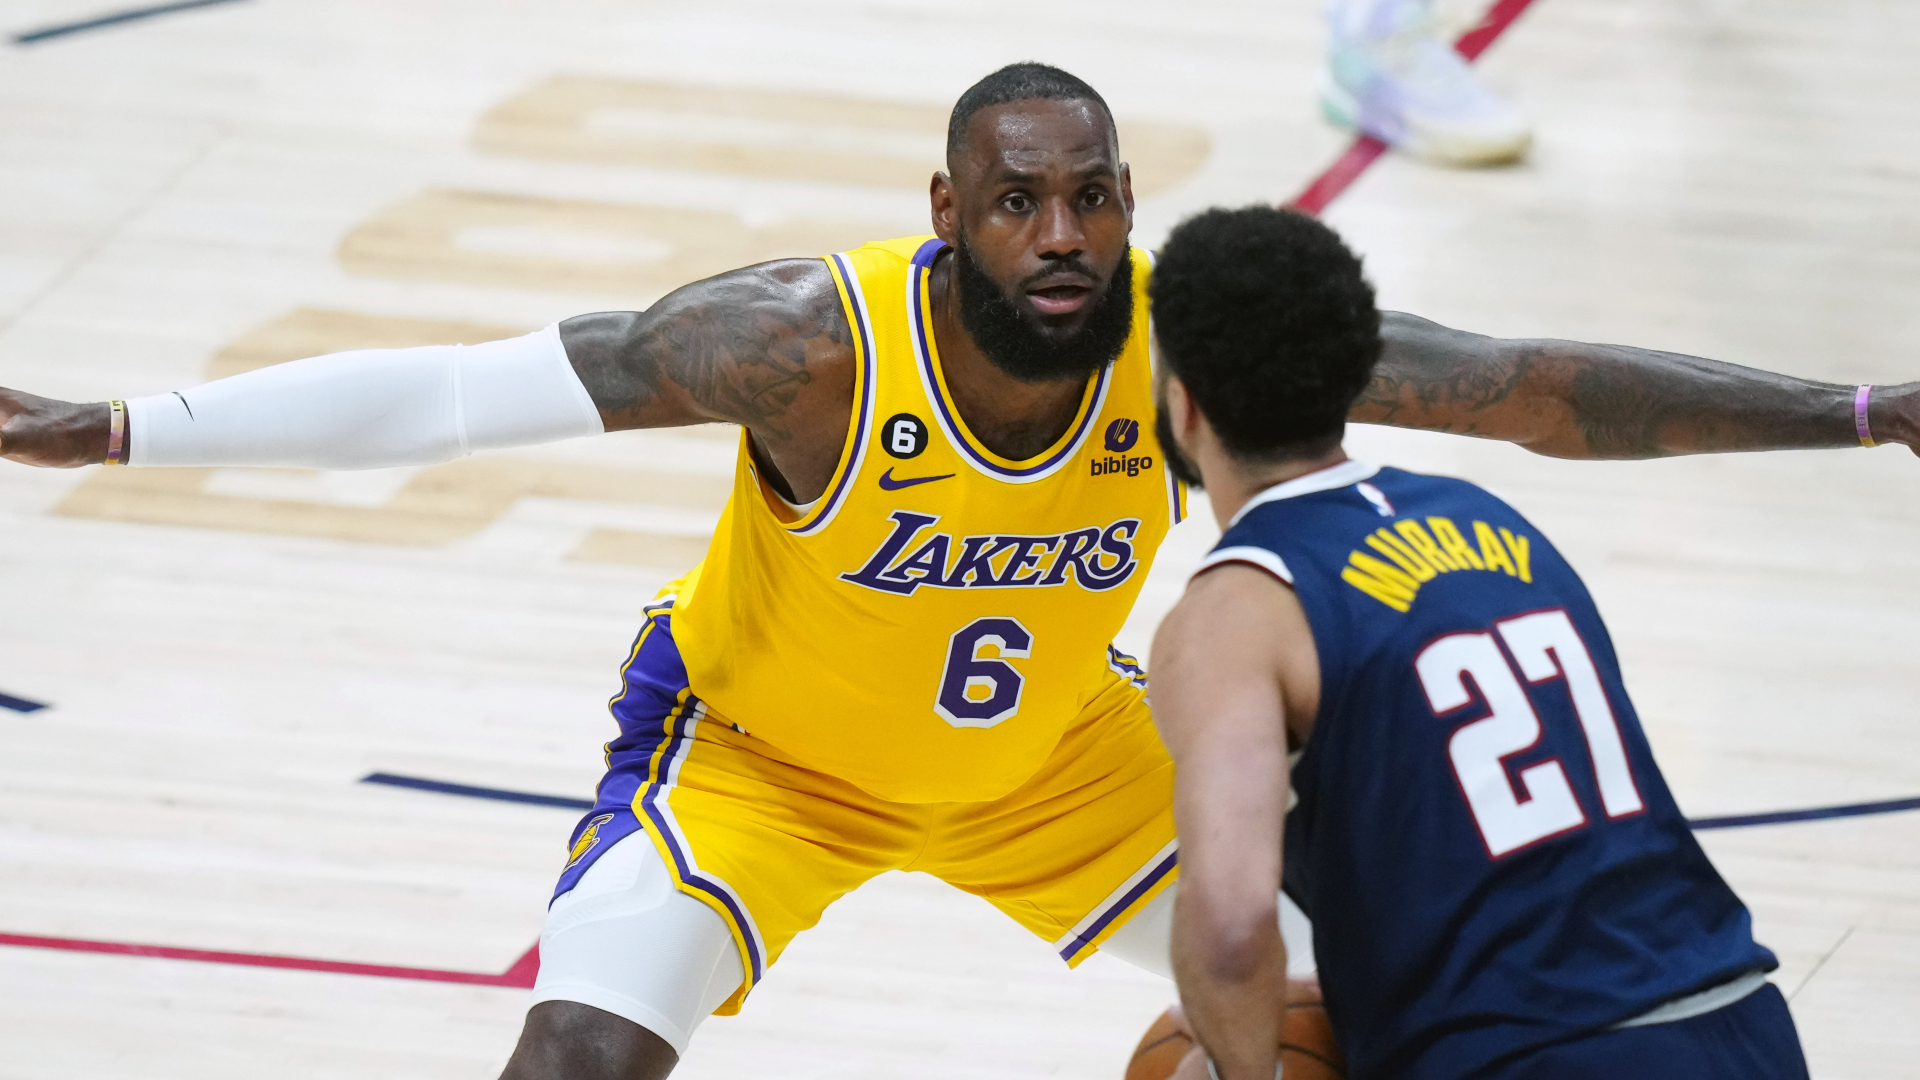 Lakers Vs. Nuggets Live Stream: Watch Western Conference Finals Game 3 Online, On TV